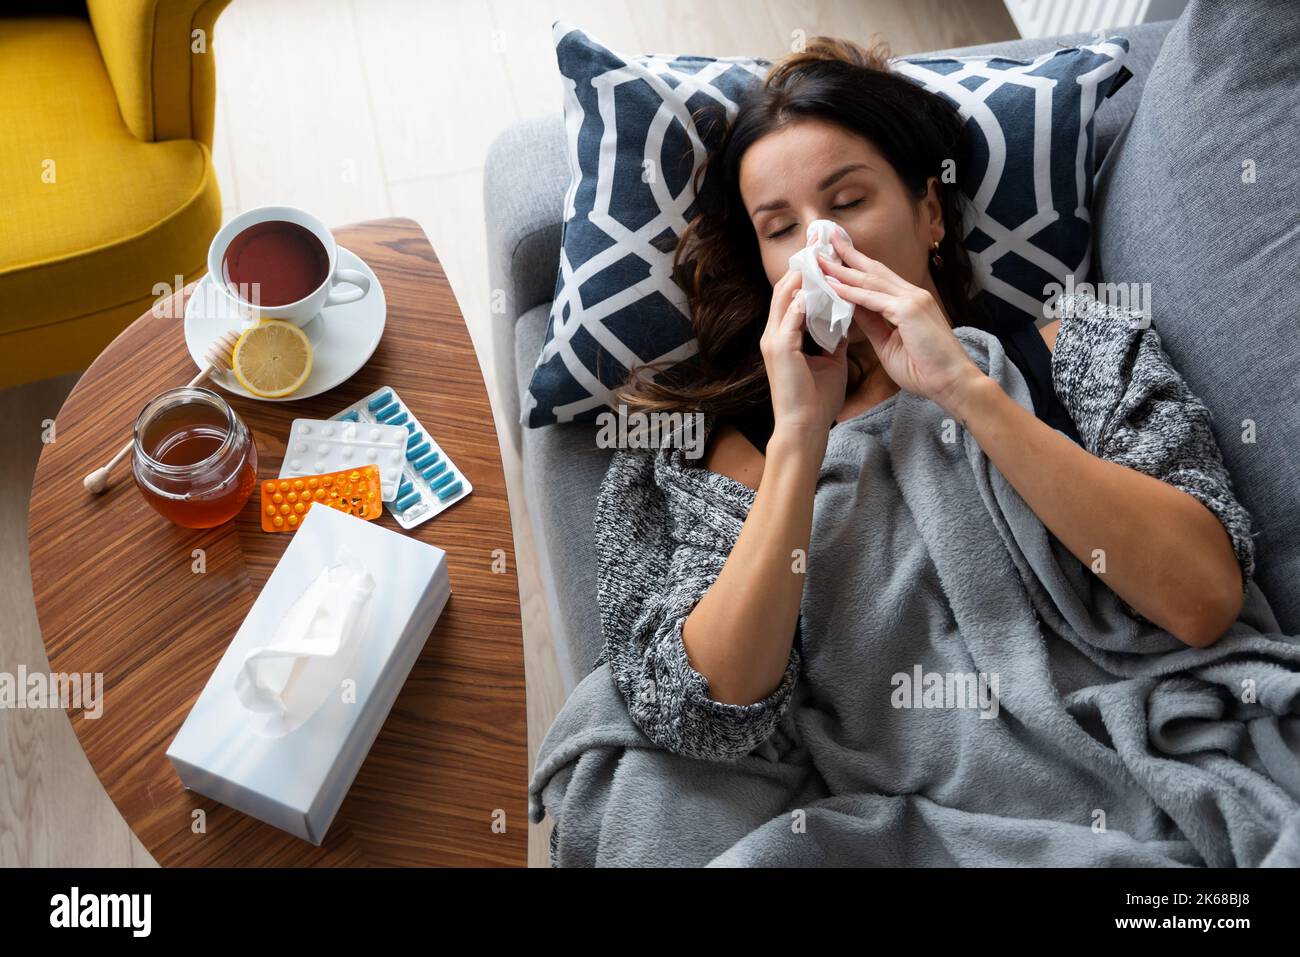 Sick woman blows her nose into a handkerchief, lying on bed Stock Photo